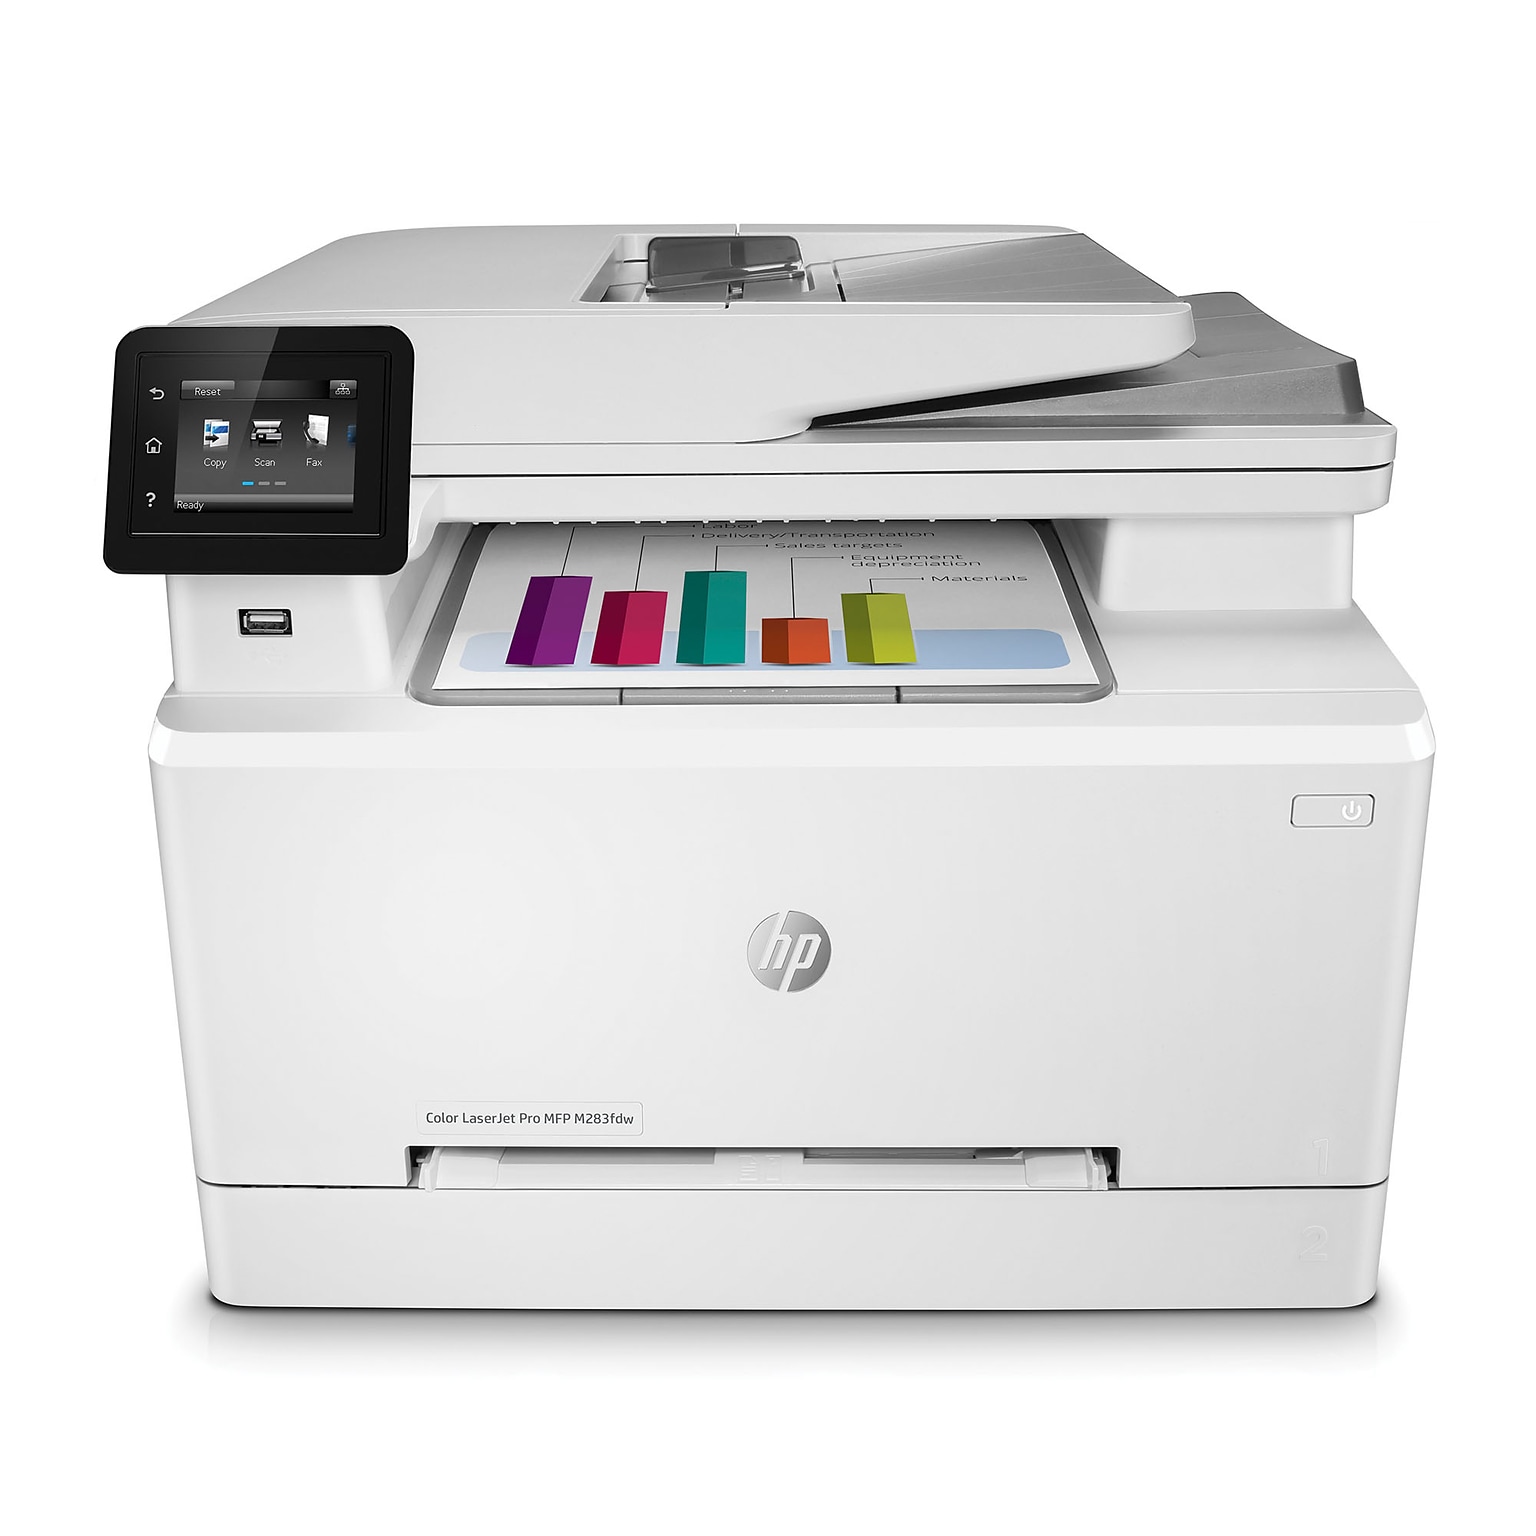 HP LaserJet Pro M283fdw Wireless Color All-In-One Laser Printer (7KW75A) |  Quill.com